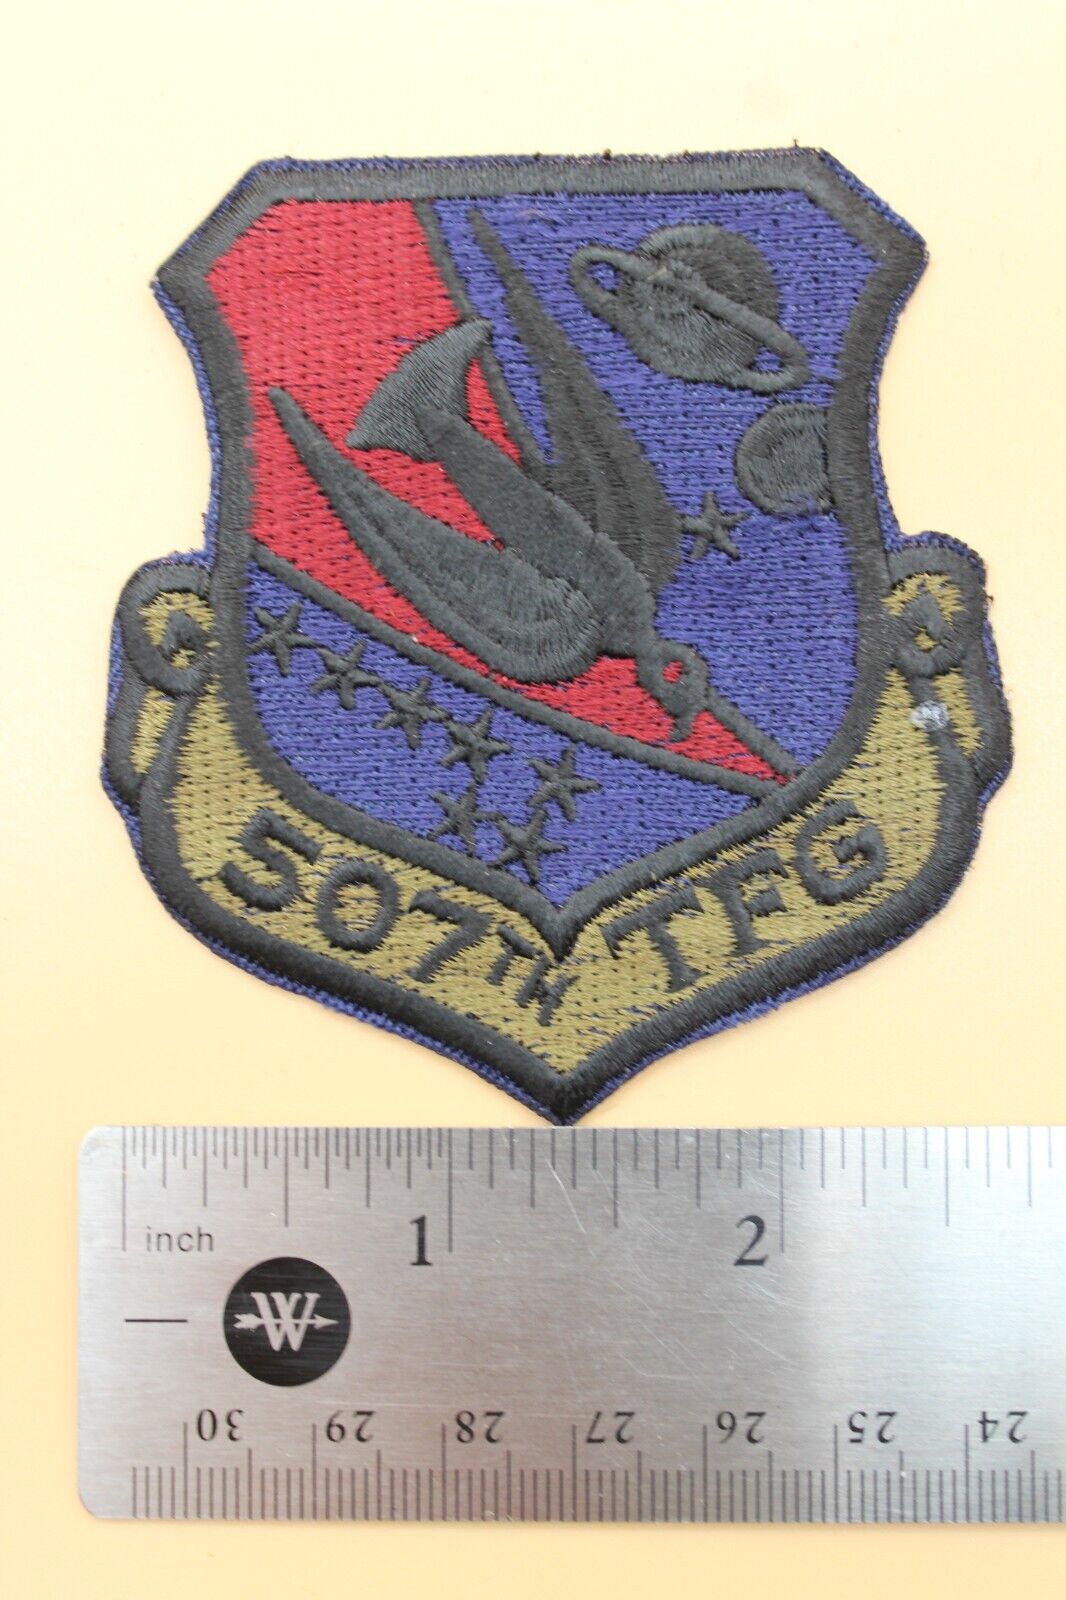 USAF 507th TFG Tactical Fighter Group Subdued Military Uniform Patch